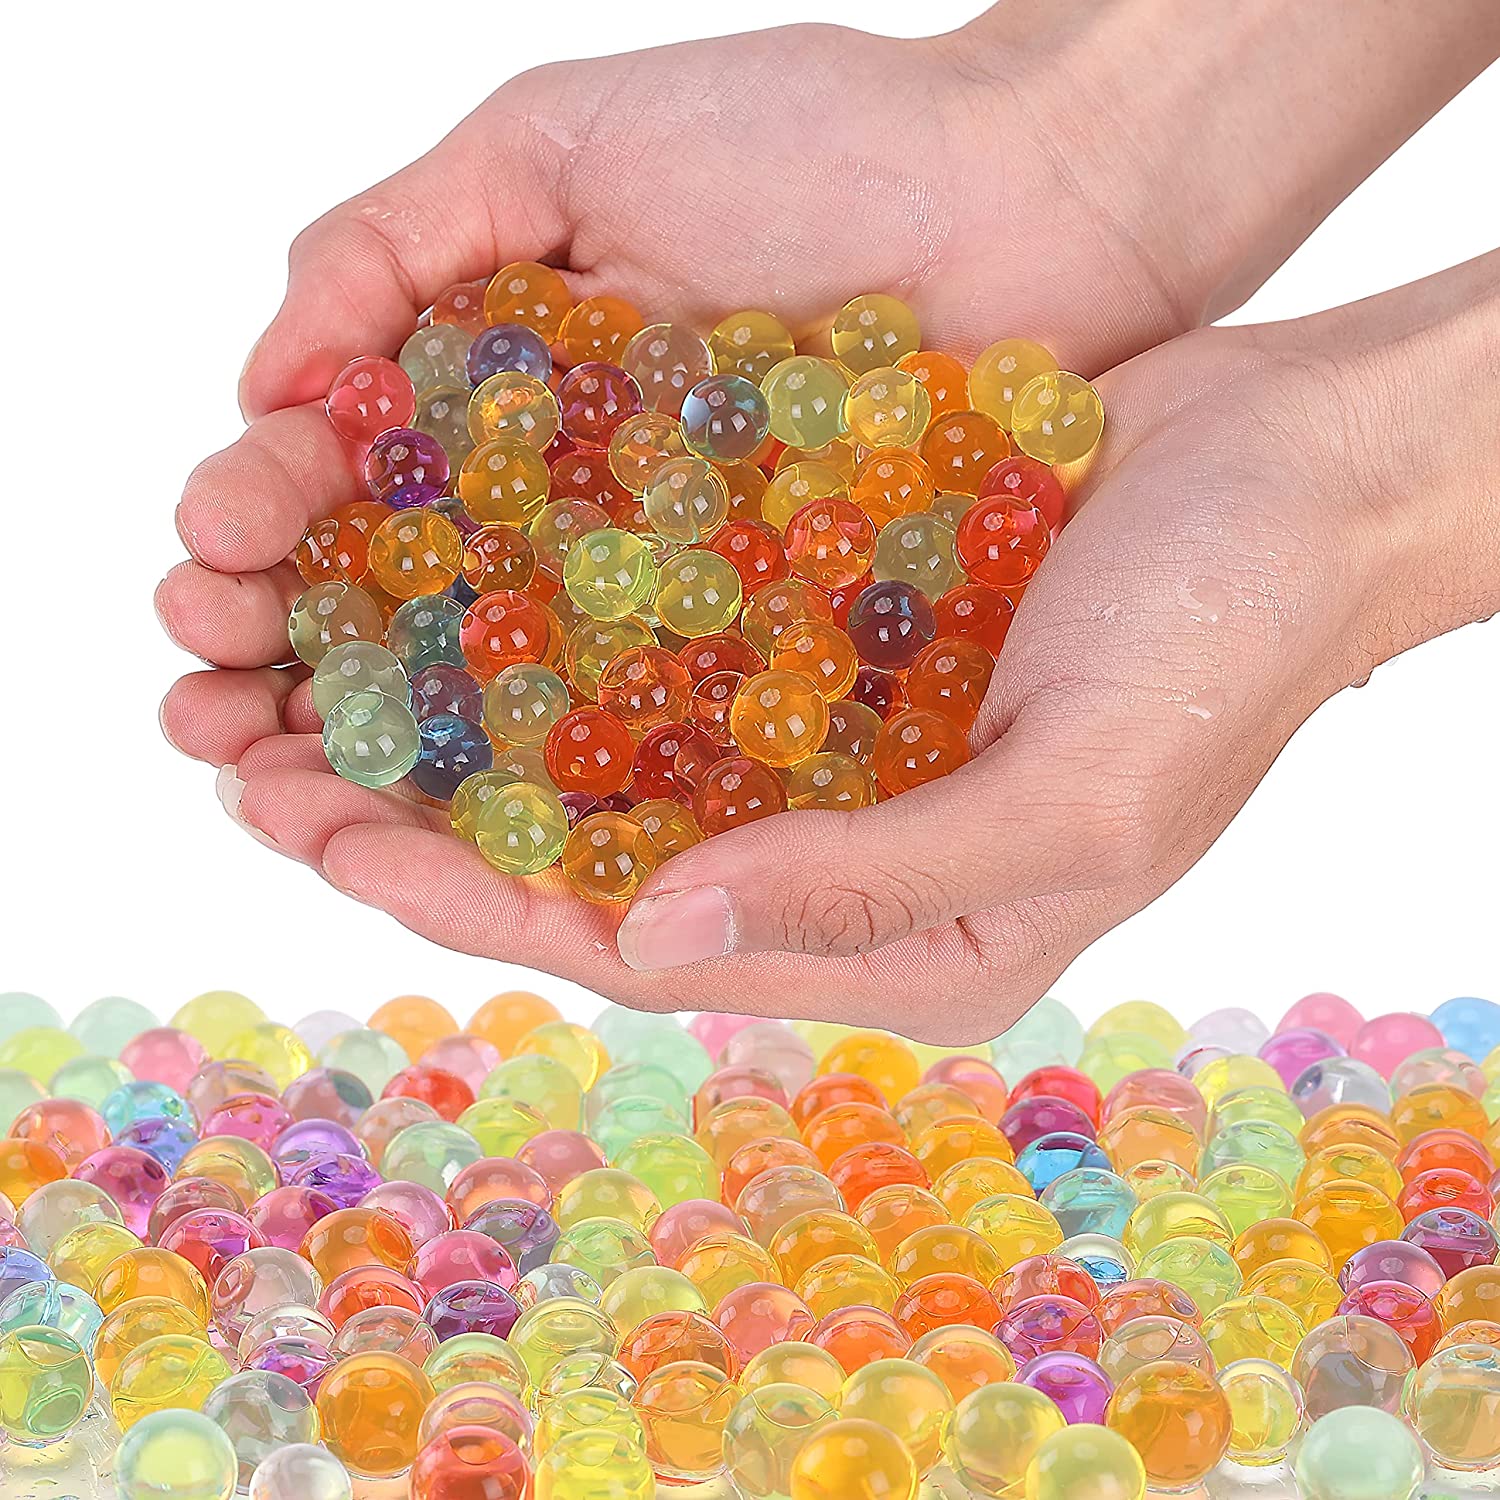 Mr. Pen- Water Beads, 20000 pcs, Rainbow Mix, Water Beads for Kids Non Toxic